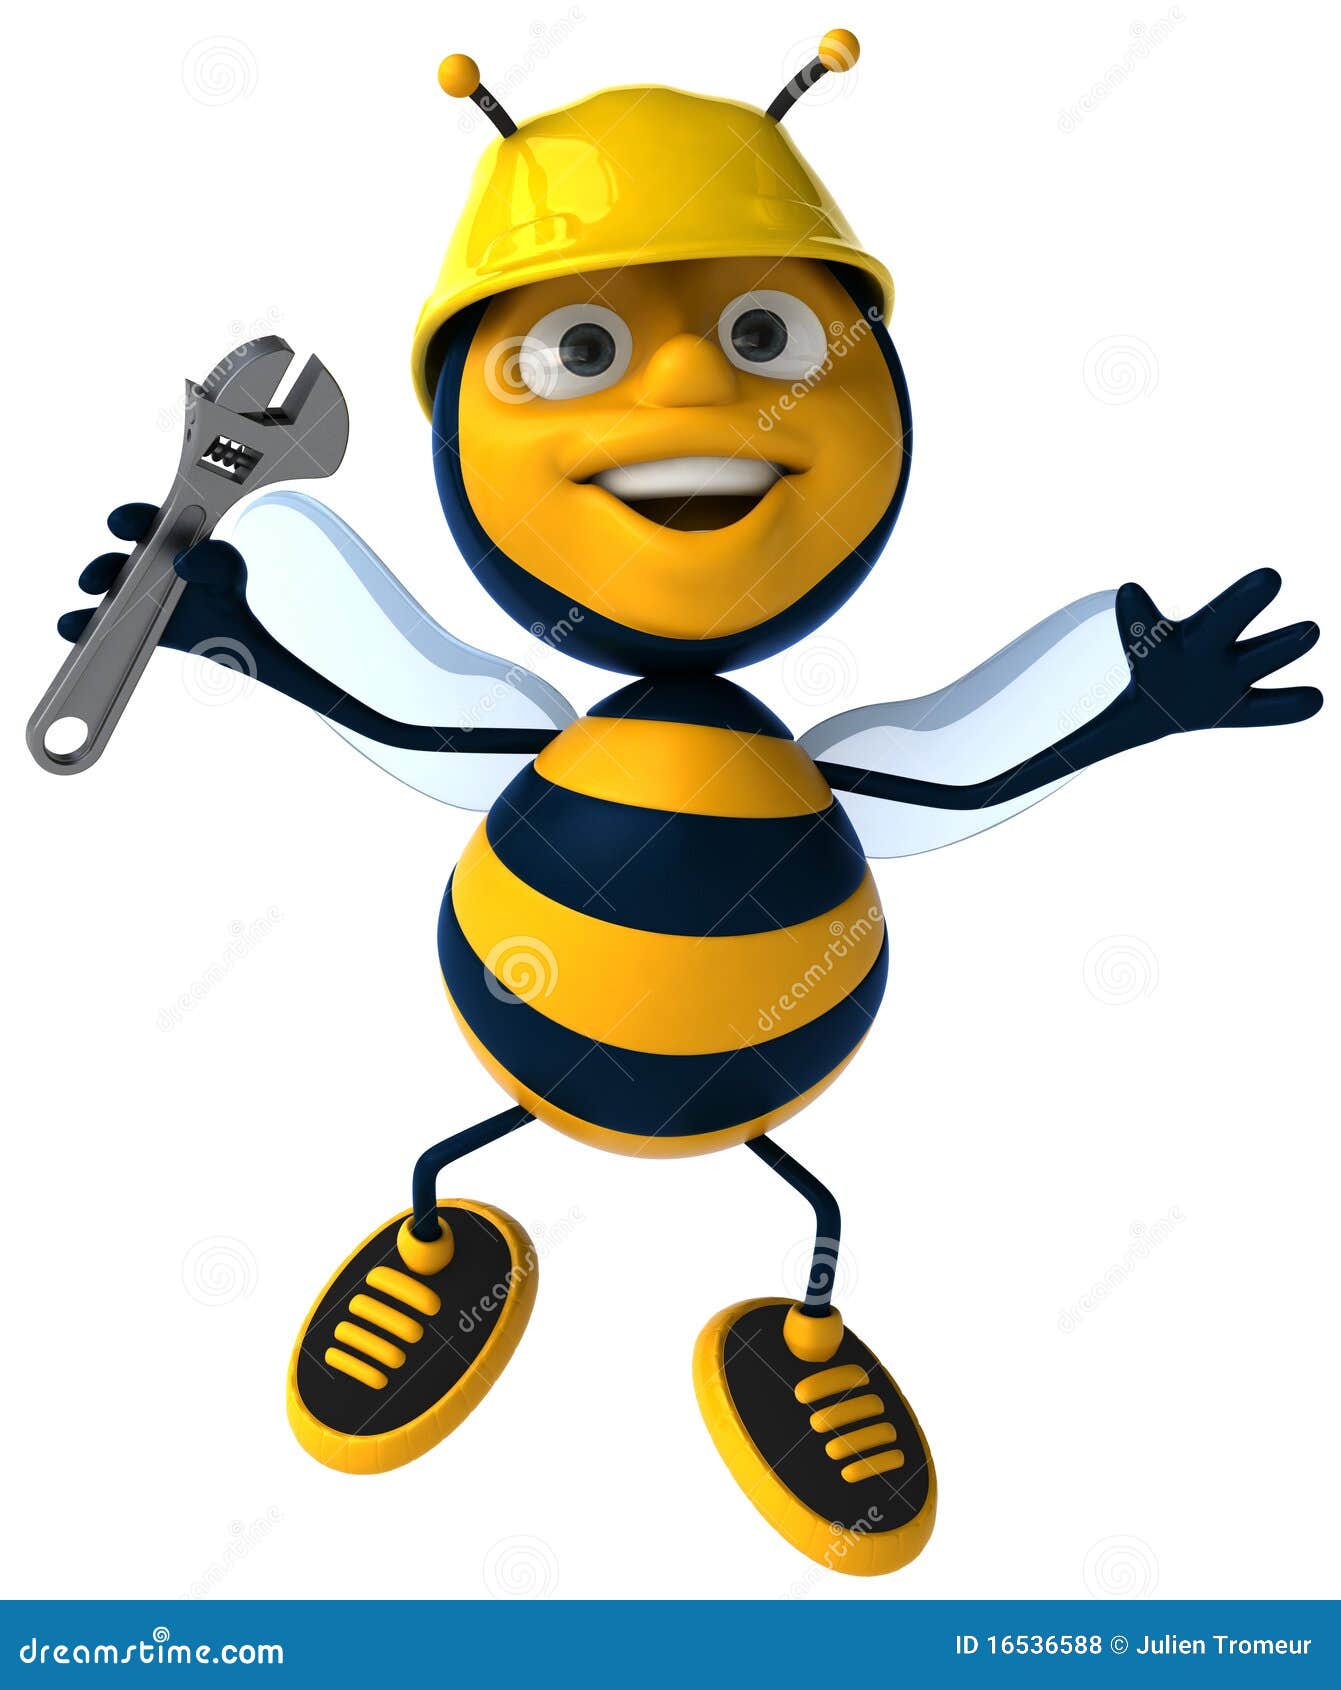 worker bee clipart - photo #47